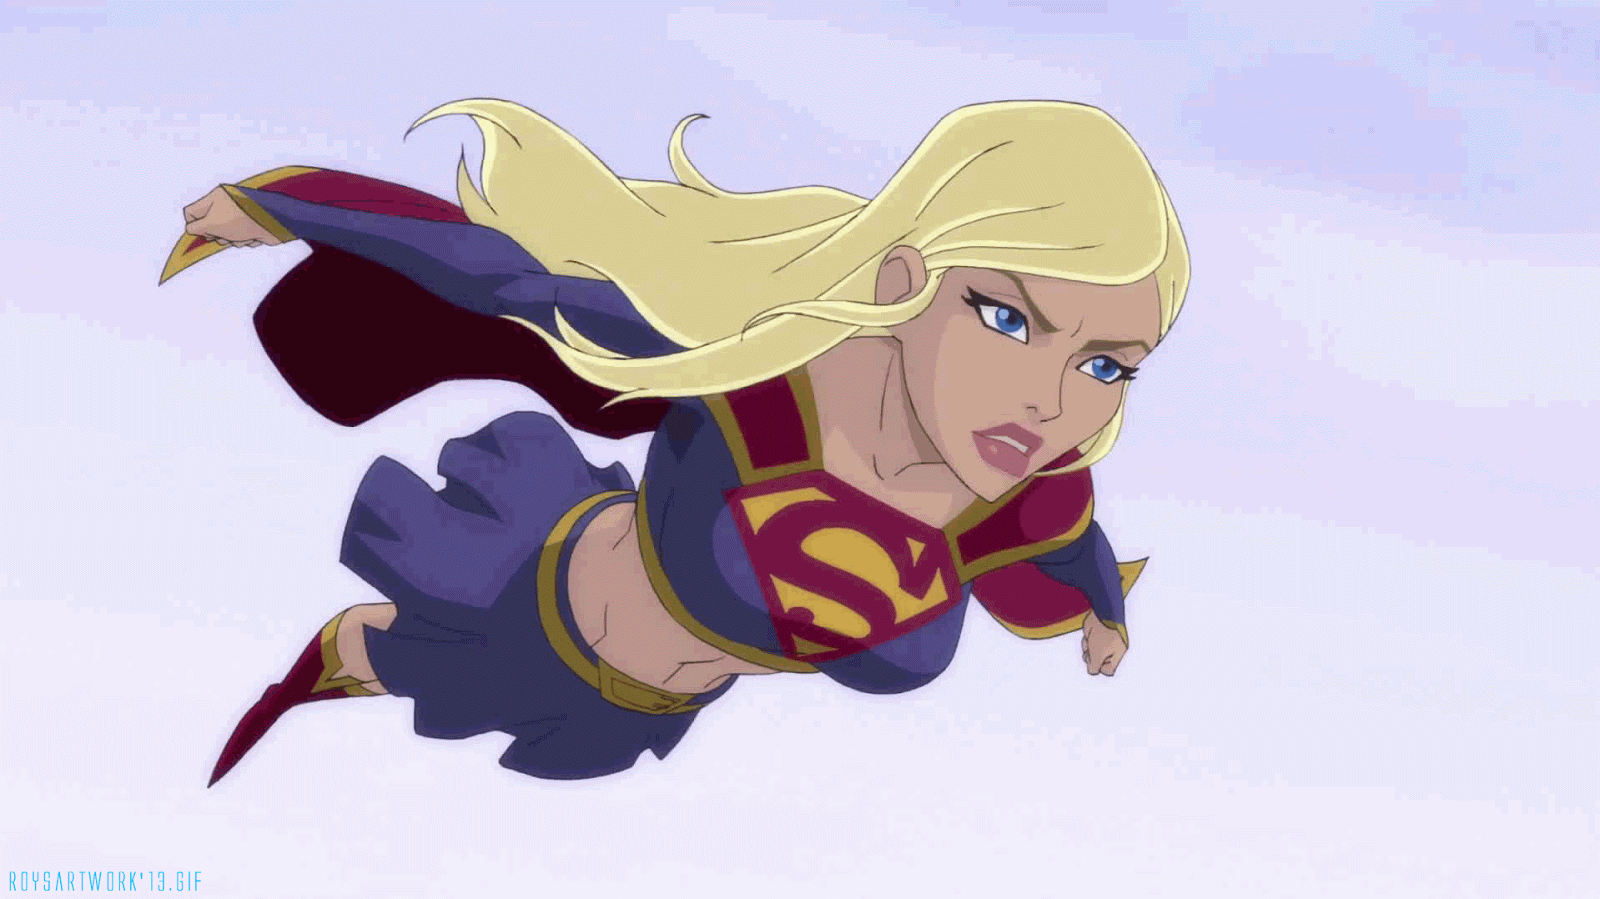 https://cdn.lowgif.com/small/8becf8e6c1b2b866-it-s-official-supergirl-series-is-coming-to-cbs.gif